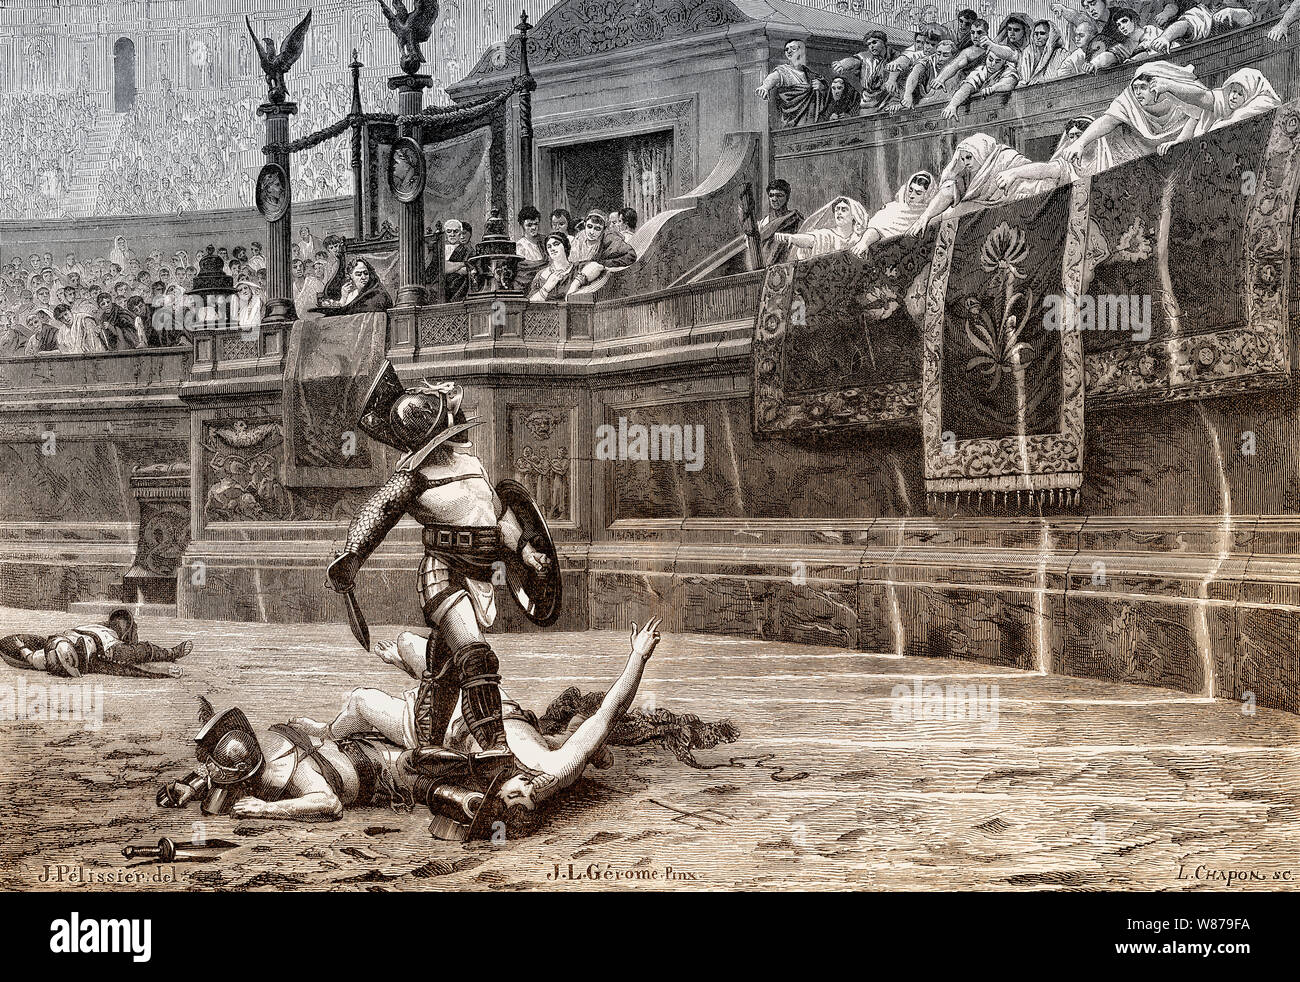 Gladiatorial Fights at the Colosseum, ancient Amphitheatre, Rome, Italy Stock Photo